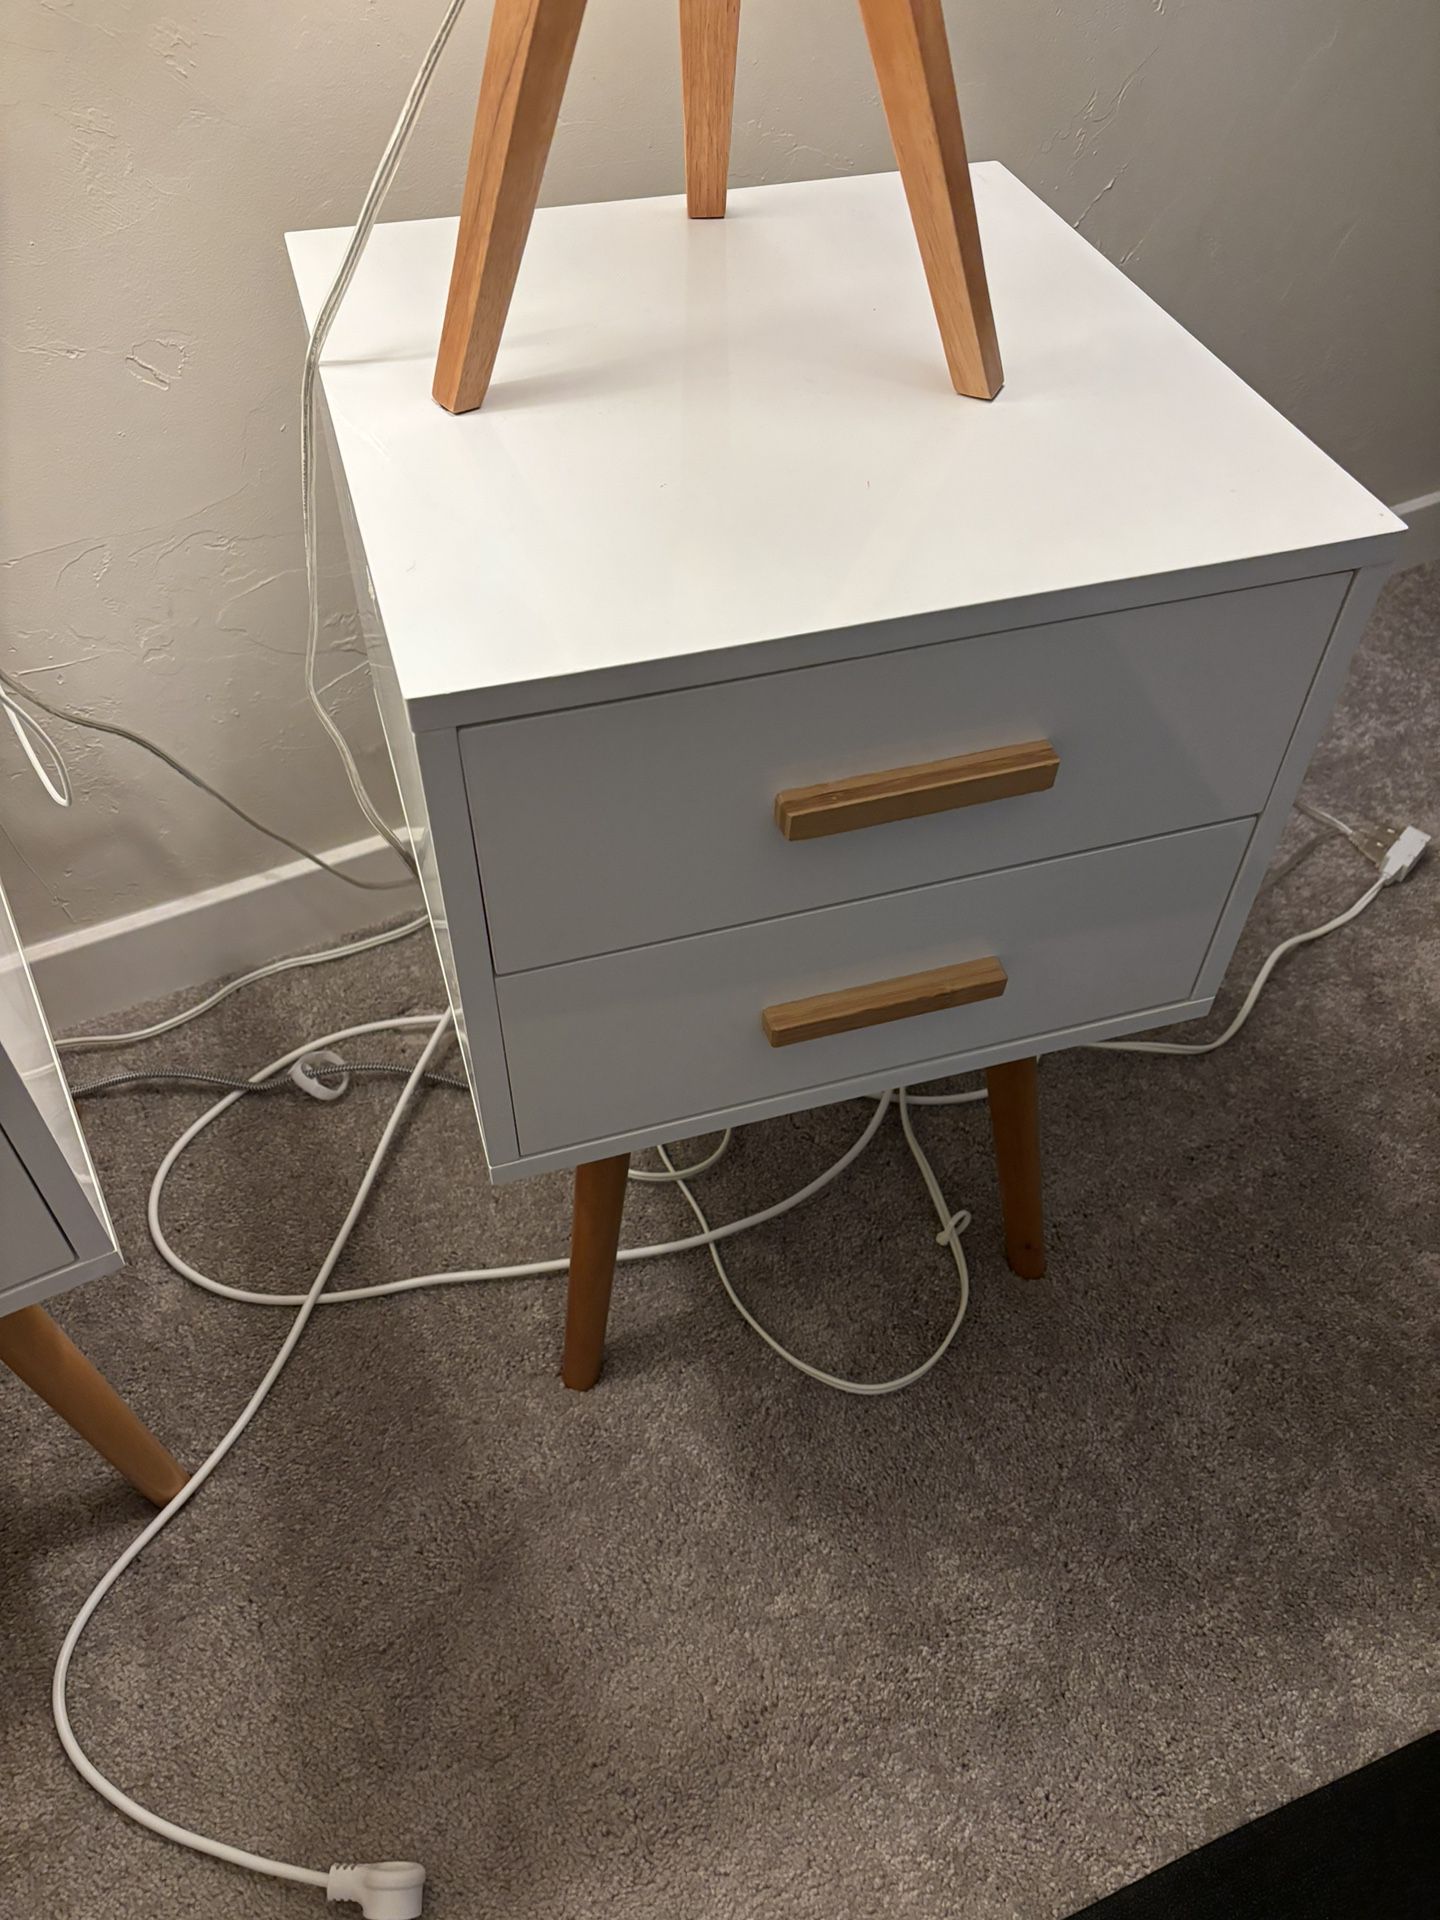 Nightstand With Two Drawers